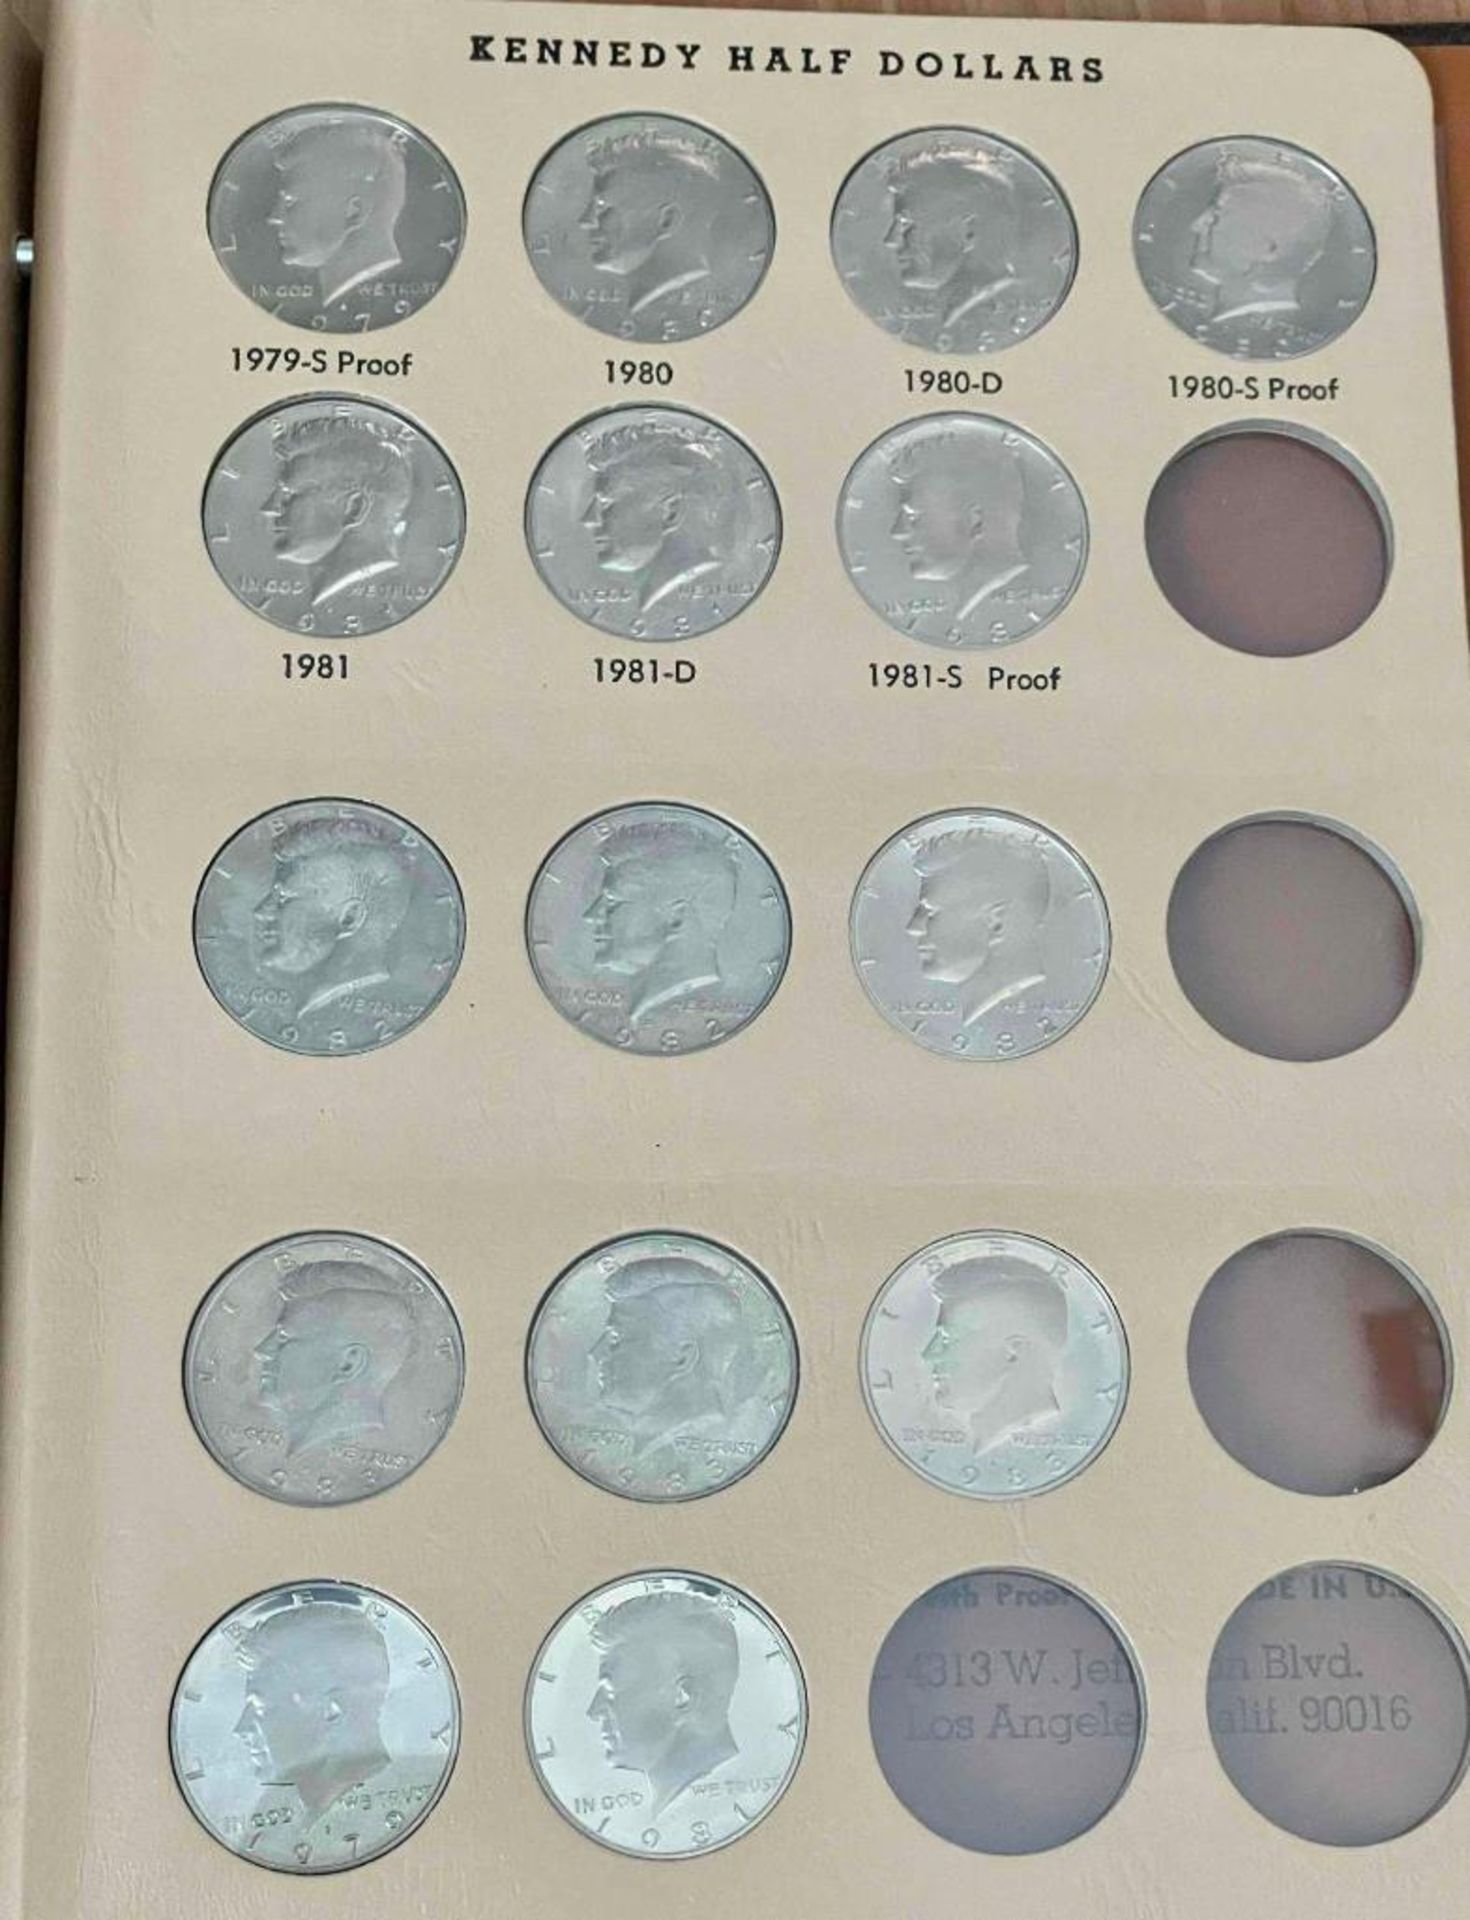 Kennedy Half Dollars 1964-1981, including proofs, silver - Image 6 of 7